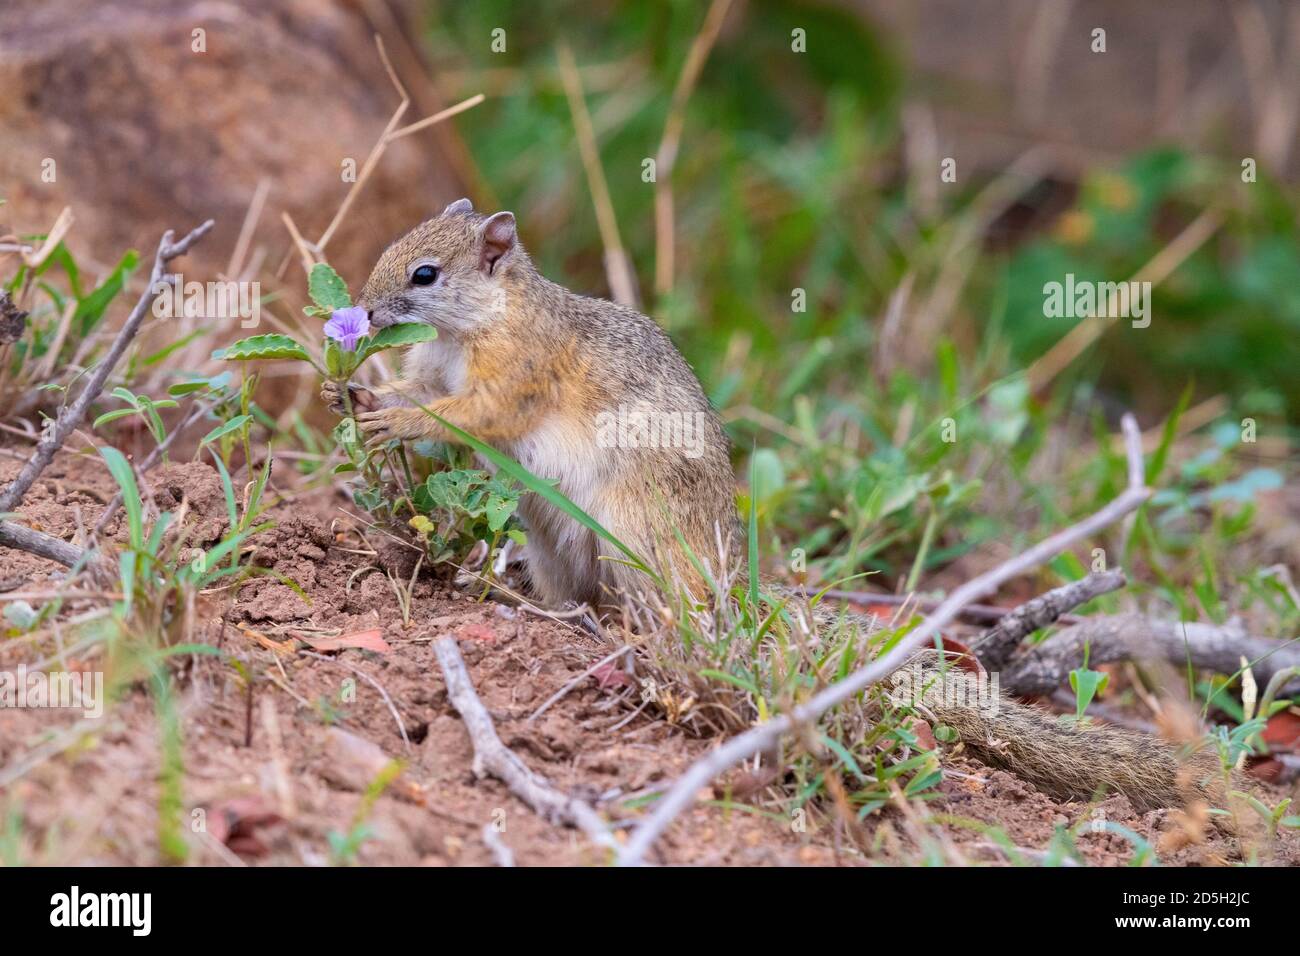 Smith's Bush Squirrel (Paraxerus cepapi), side view of an adult feeding on a plant, Mpumalanga, South Africa Stock Photo